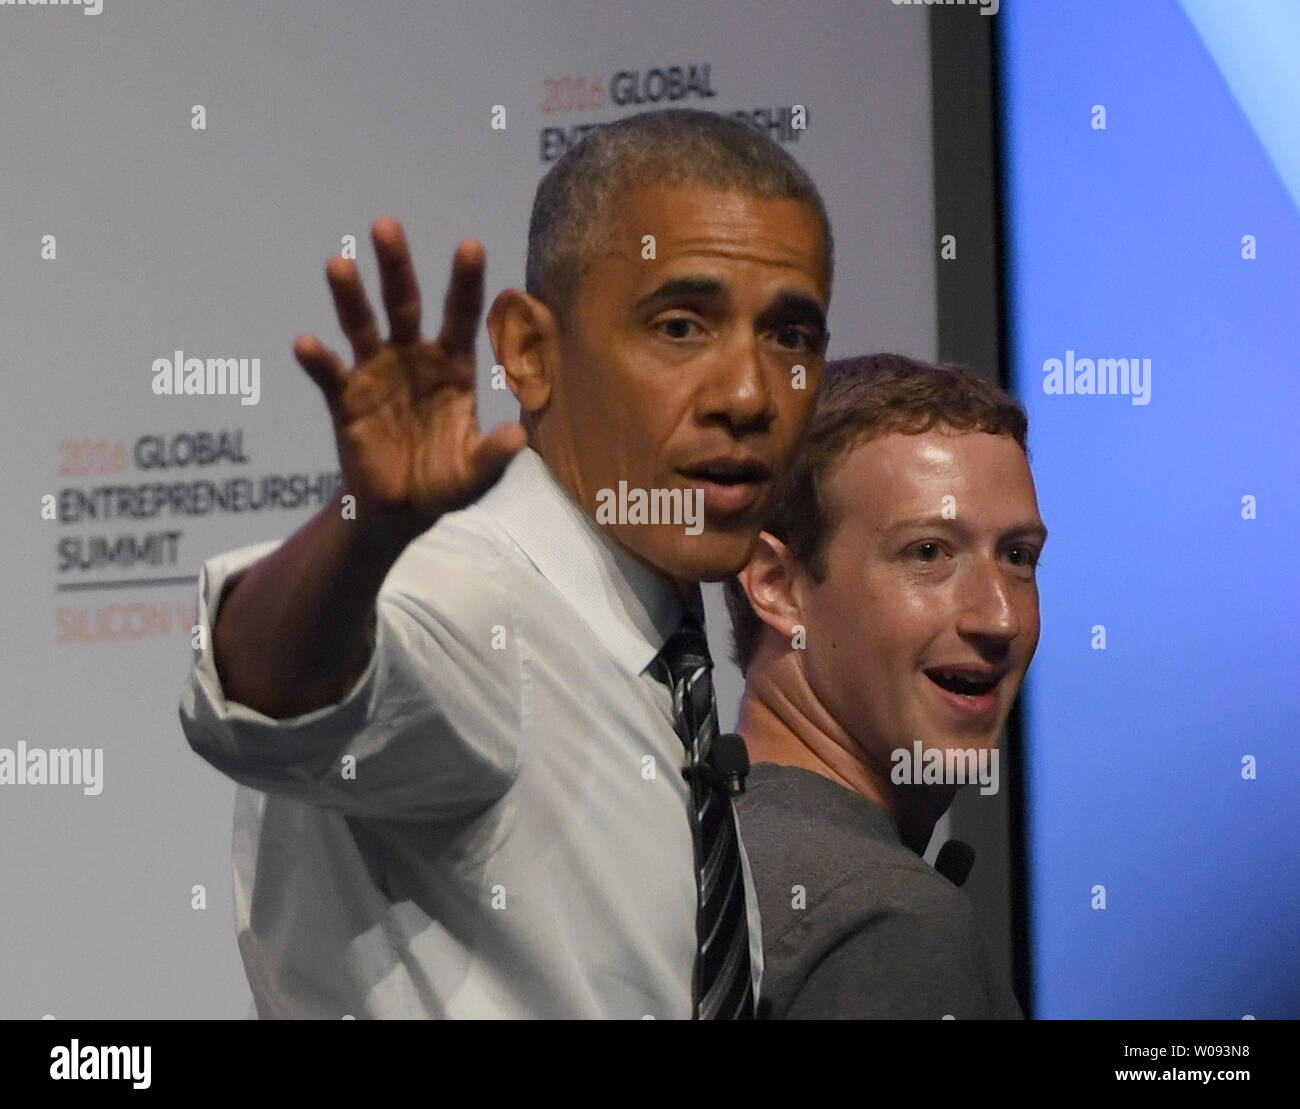 President Barack Obama departs with Facebook founder Mark Zuckerberg after a panel discussion at the Global Entrepreneurship Summit 2016 at Stanford University in Palo Alto, California on June 24,  2016. GES aims to connect American entrepreneurs and investors with international counterparts.          Photo by Terry Schmitt/UPI Stock Photo